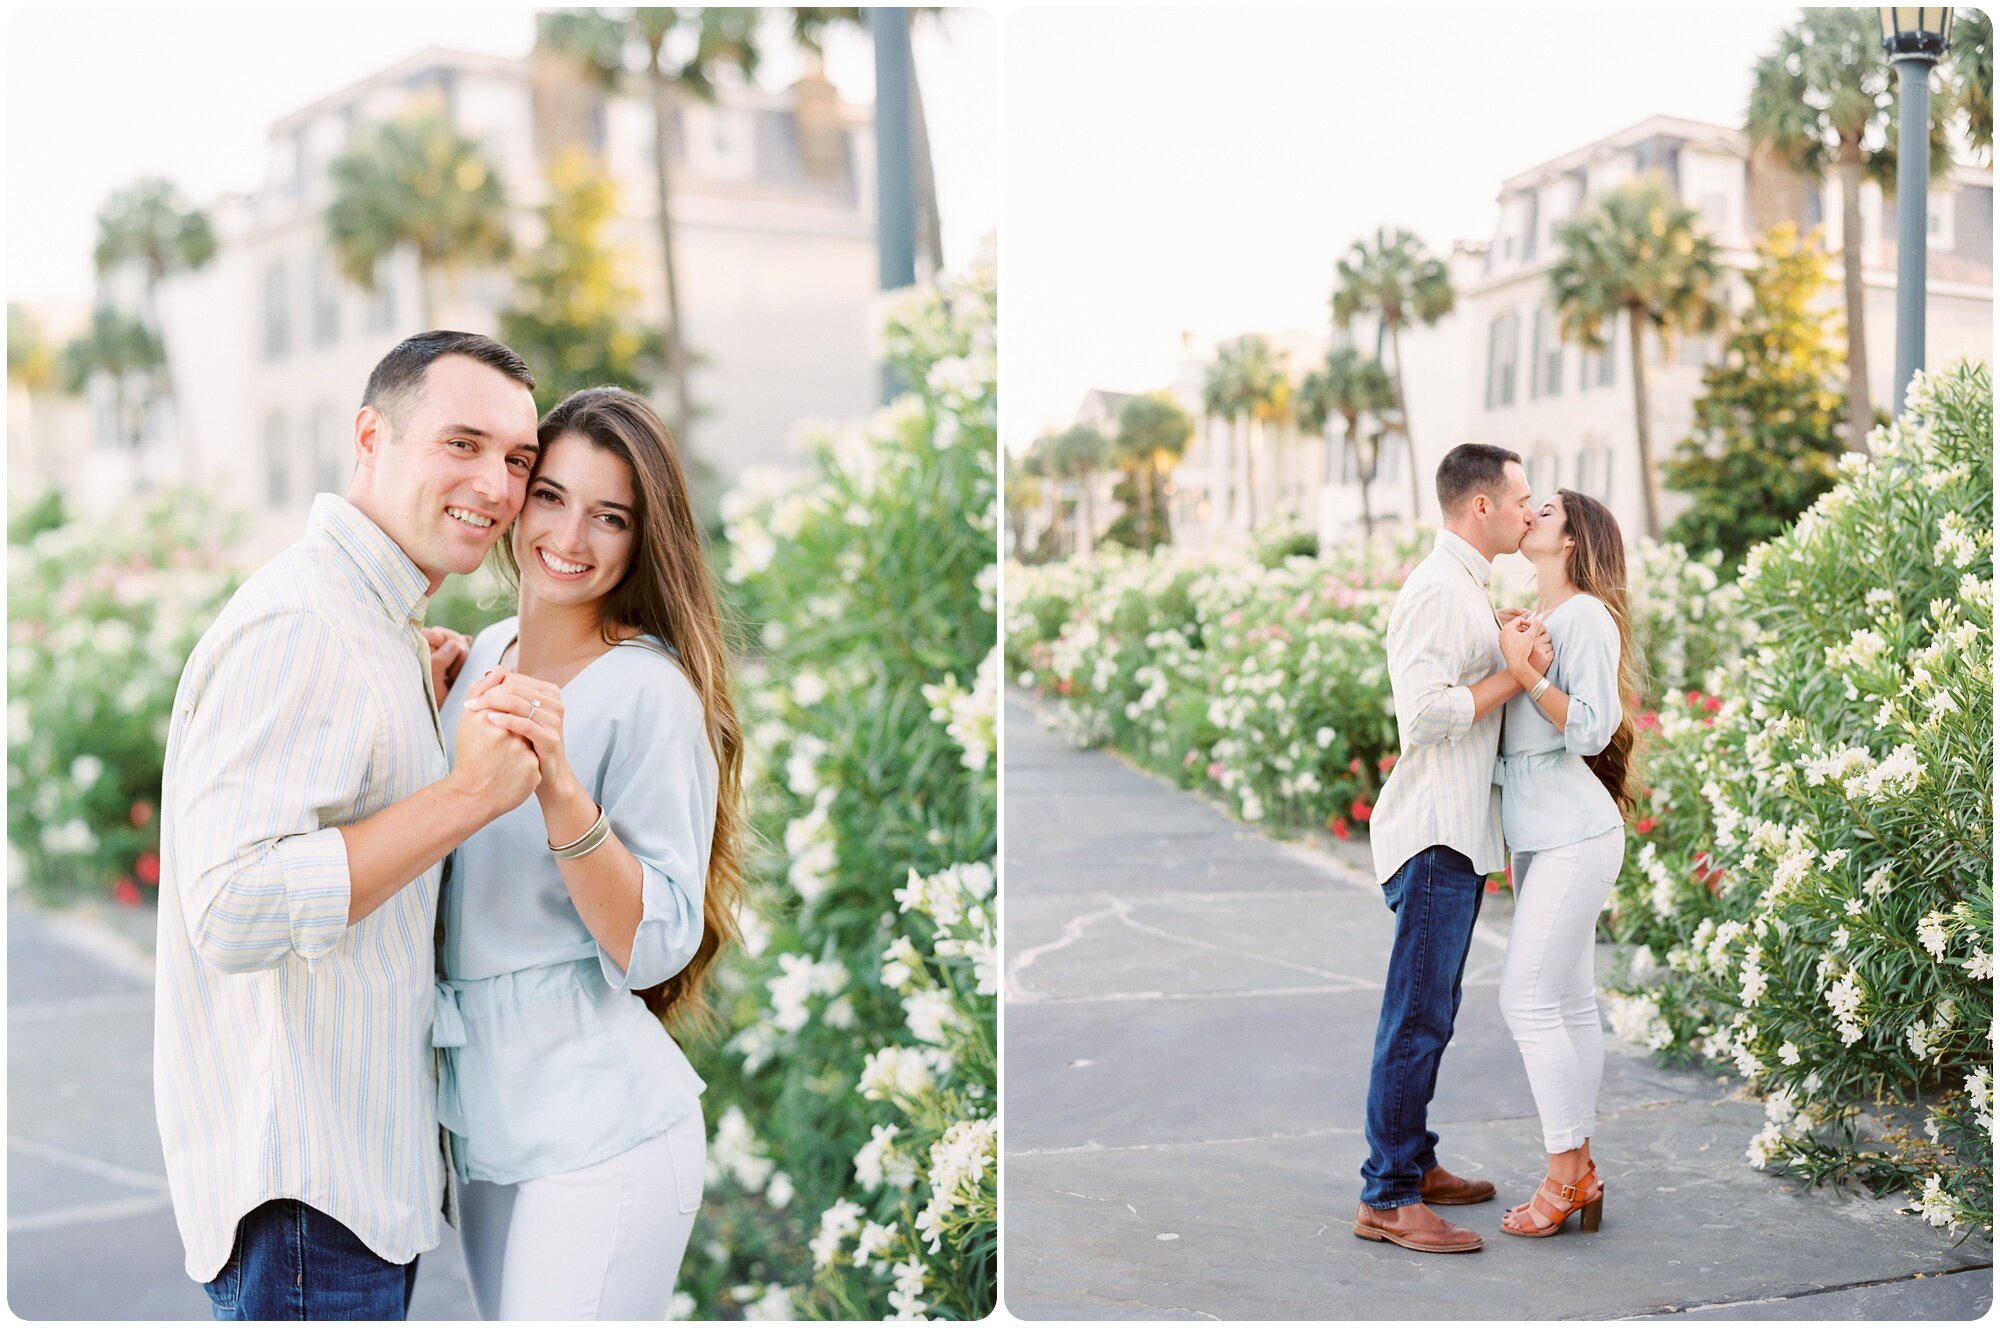 rainbow_row_yellow_blue_outfit_battery_downtown_charleston_engagement_puppy_outdoor_wedding_photographers_husband_wife_team_kailee_tim_kailee_dimeglio_photography_charleston_traveling_photographers_0019.jpg